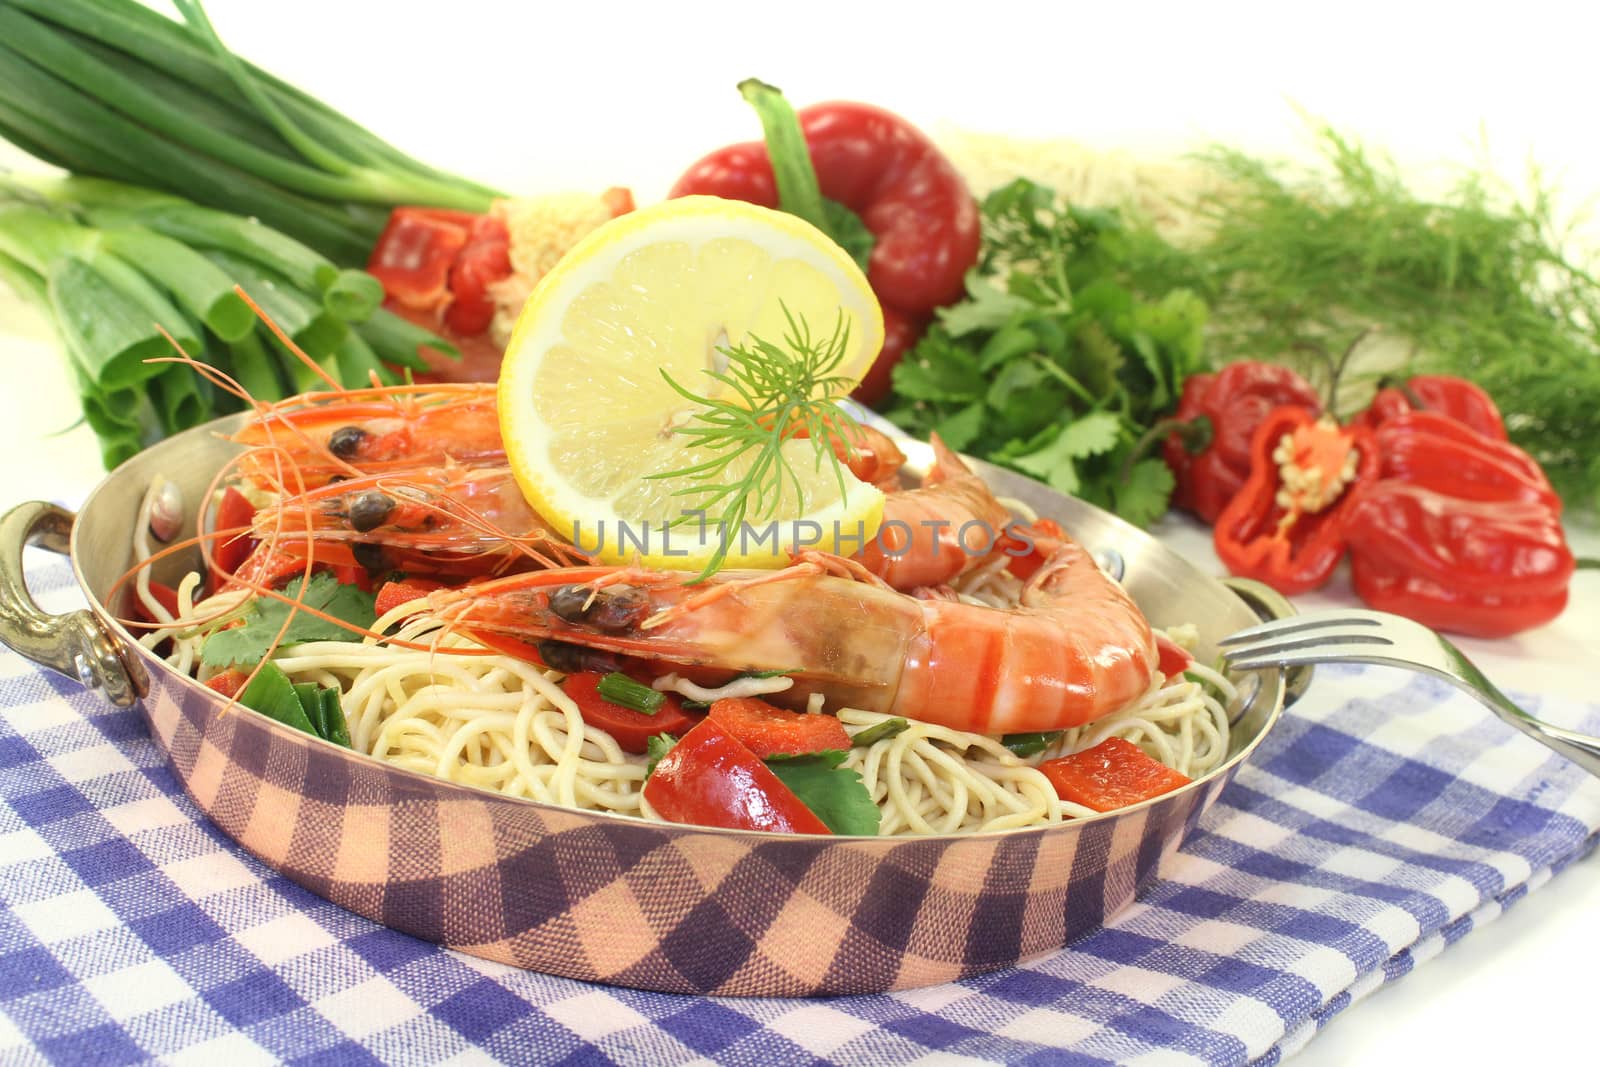 Shrimp with mie noodles and coriander by discovery